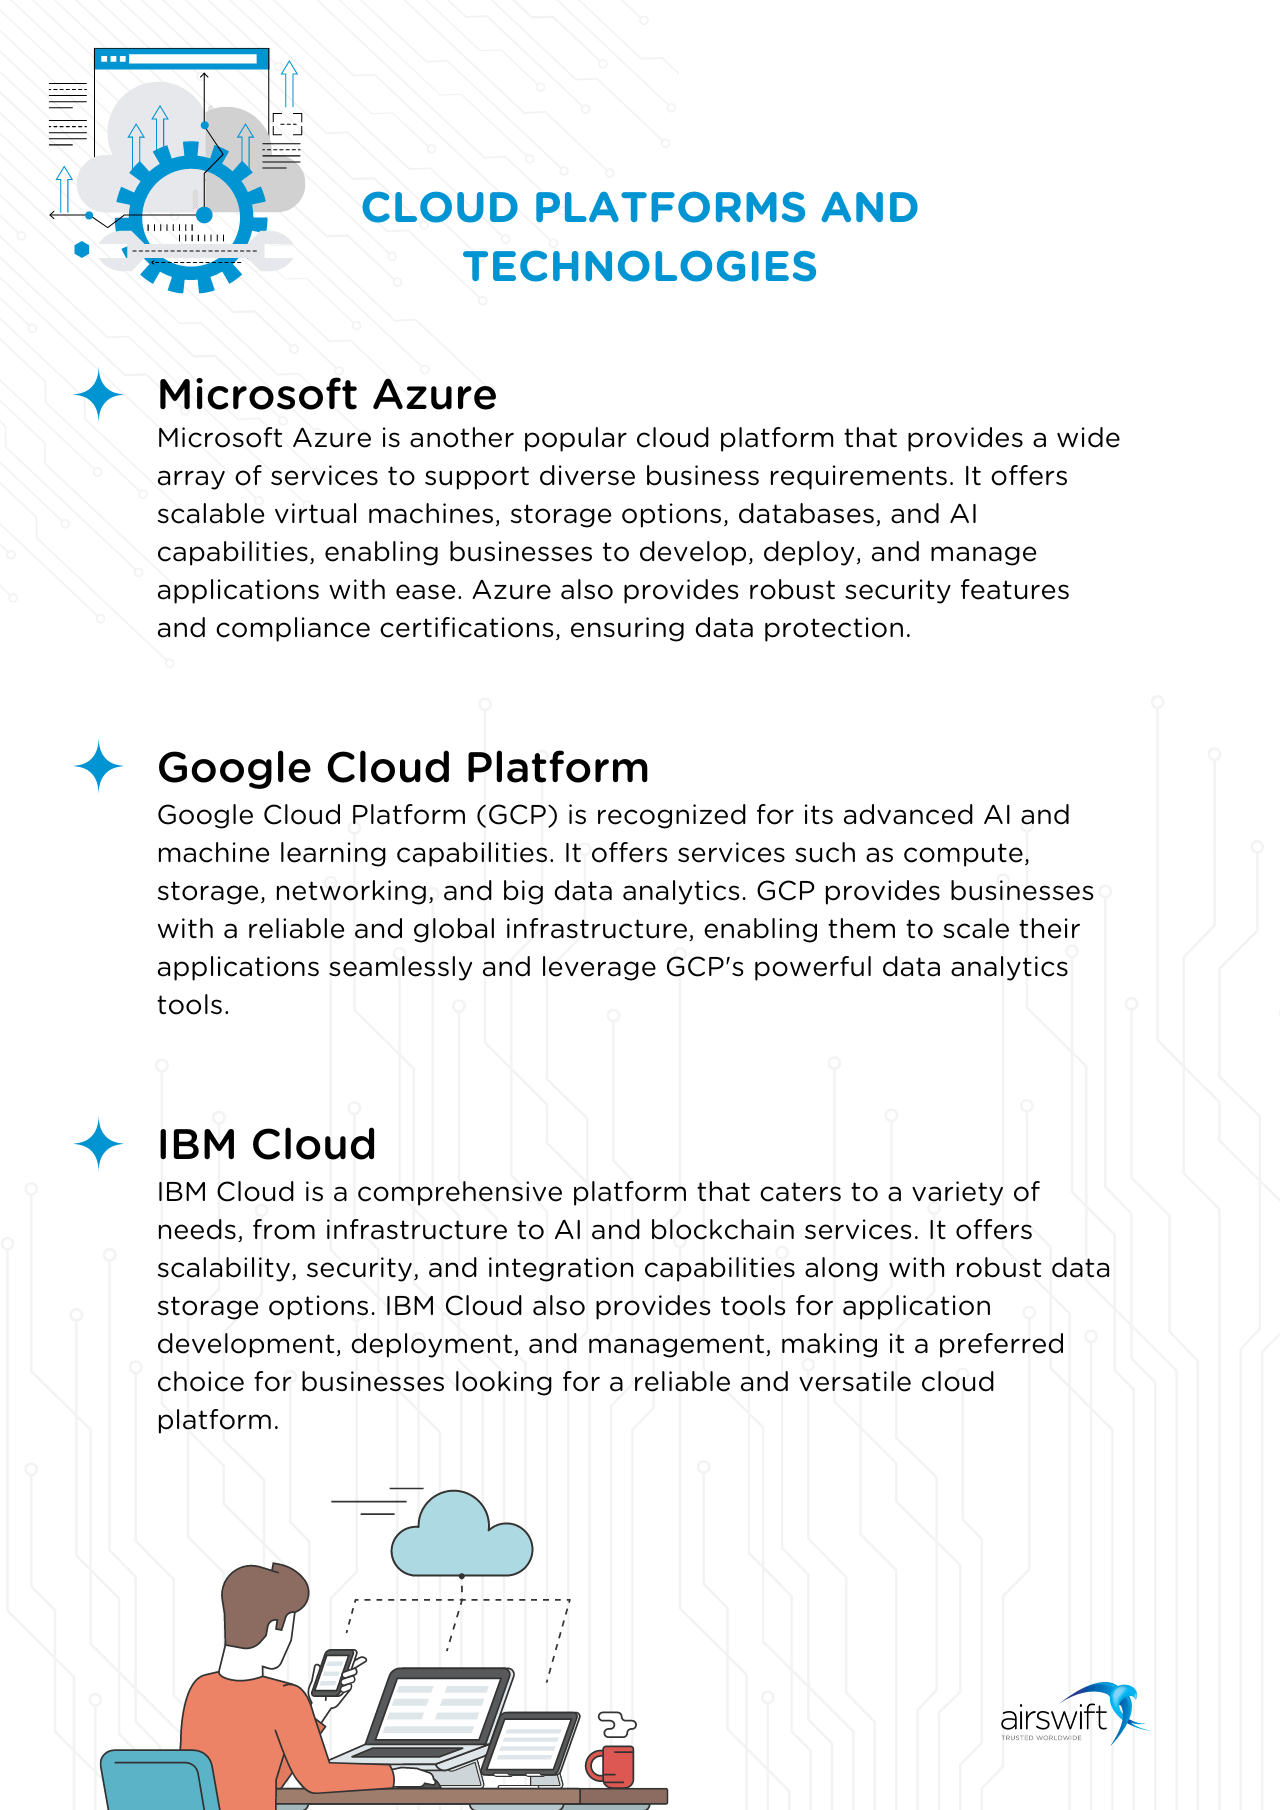 cloud platforms and their definitions